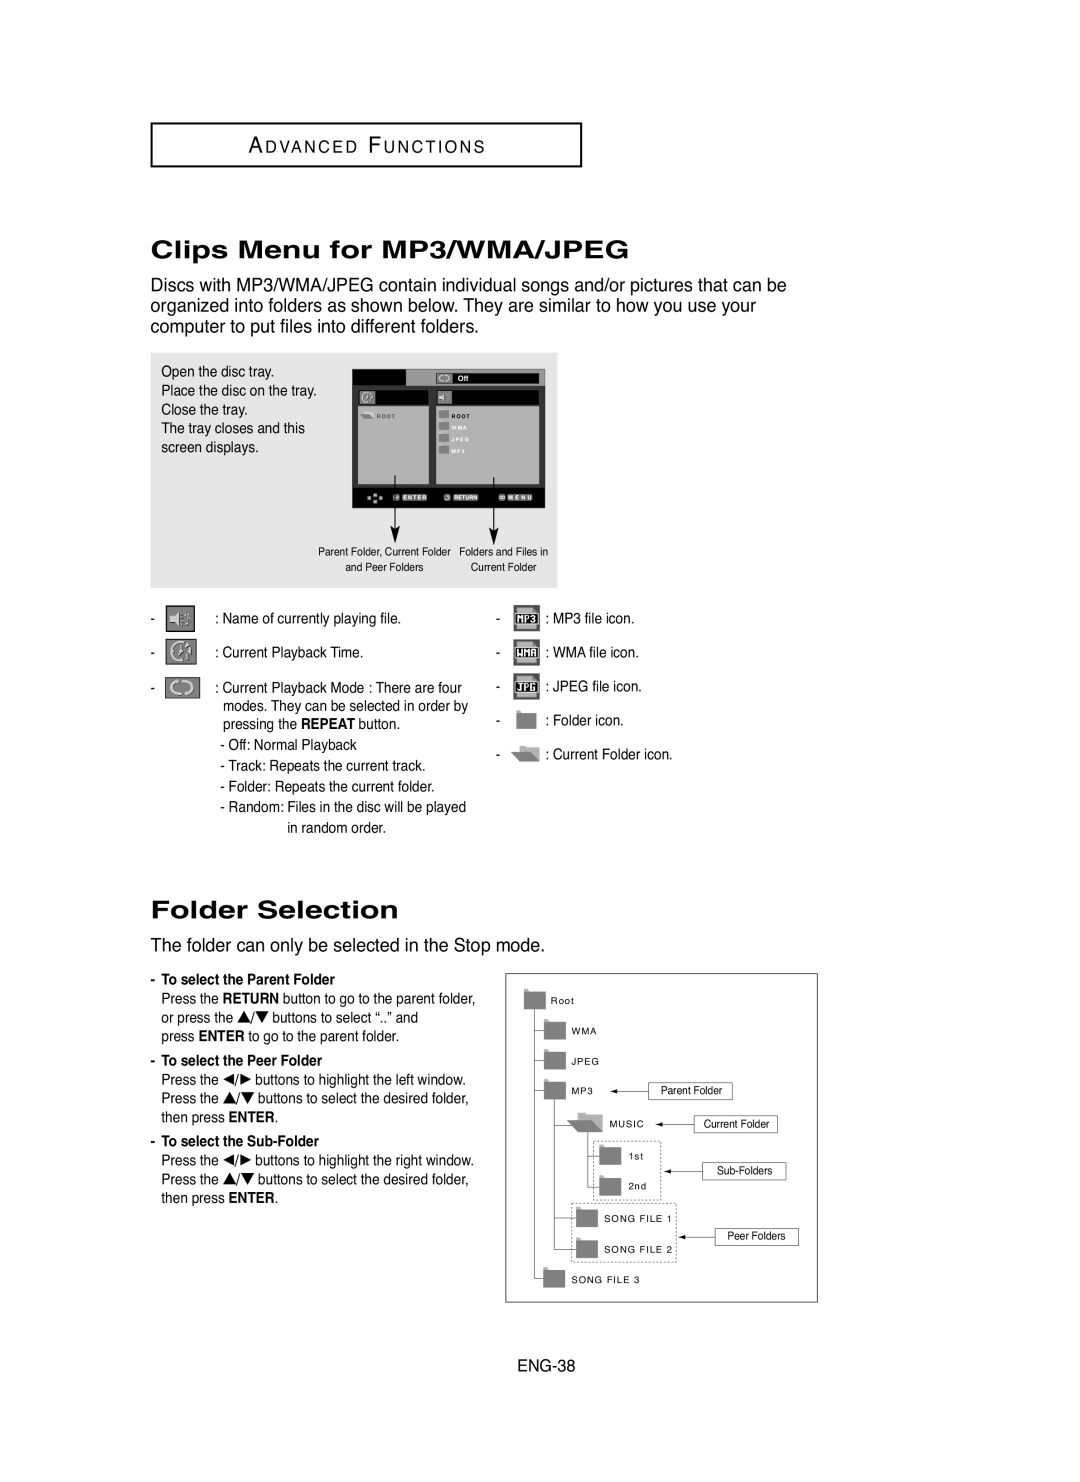 Samsung DVD-HD755 Clips Menu for MP3/WMA/JPEG, Folder Selection, The folder can only be selected in the Stop mode, ENG-38 